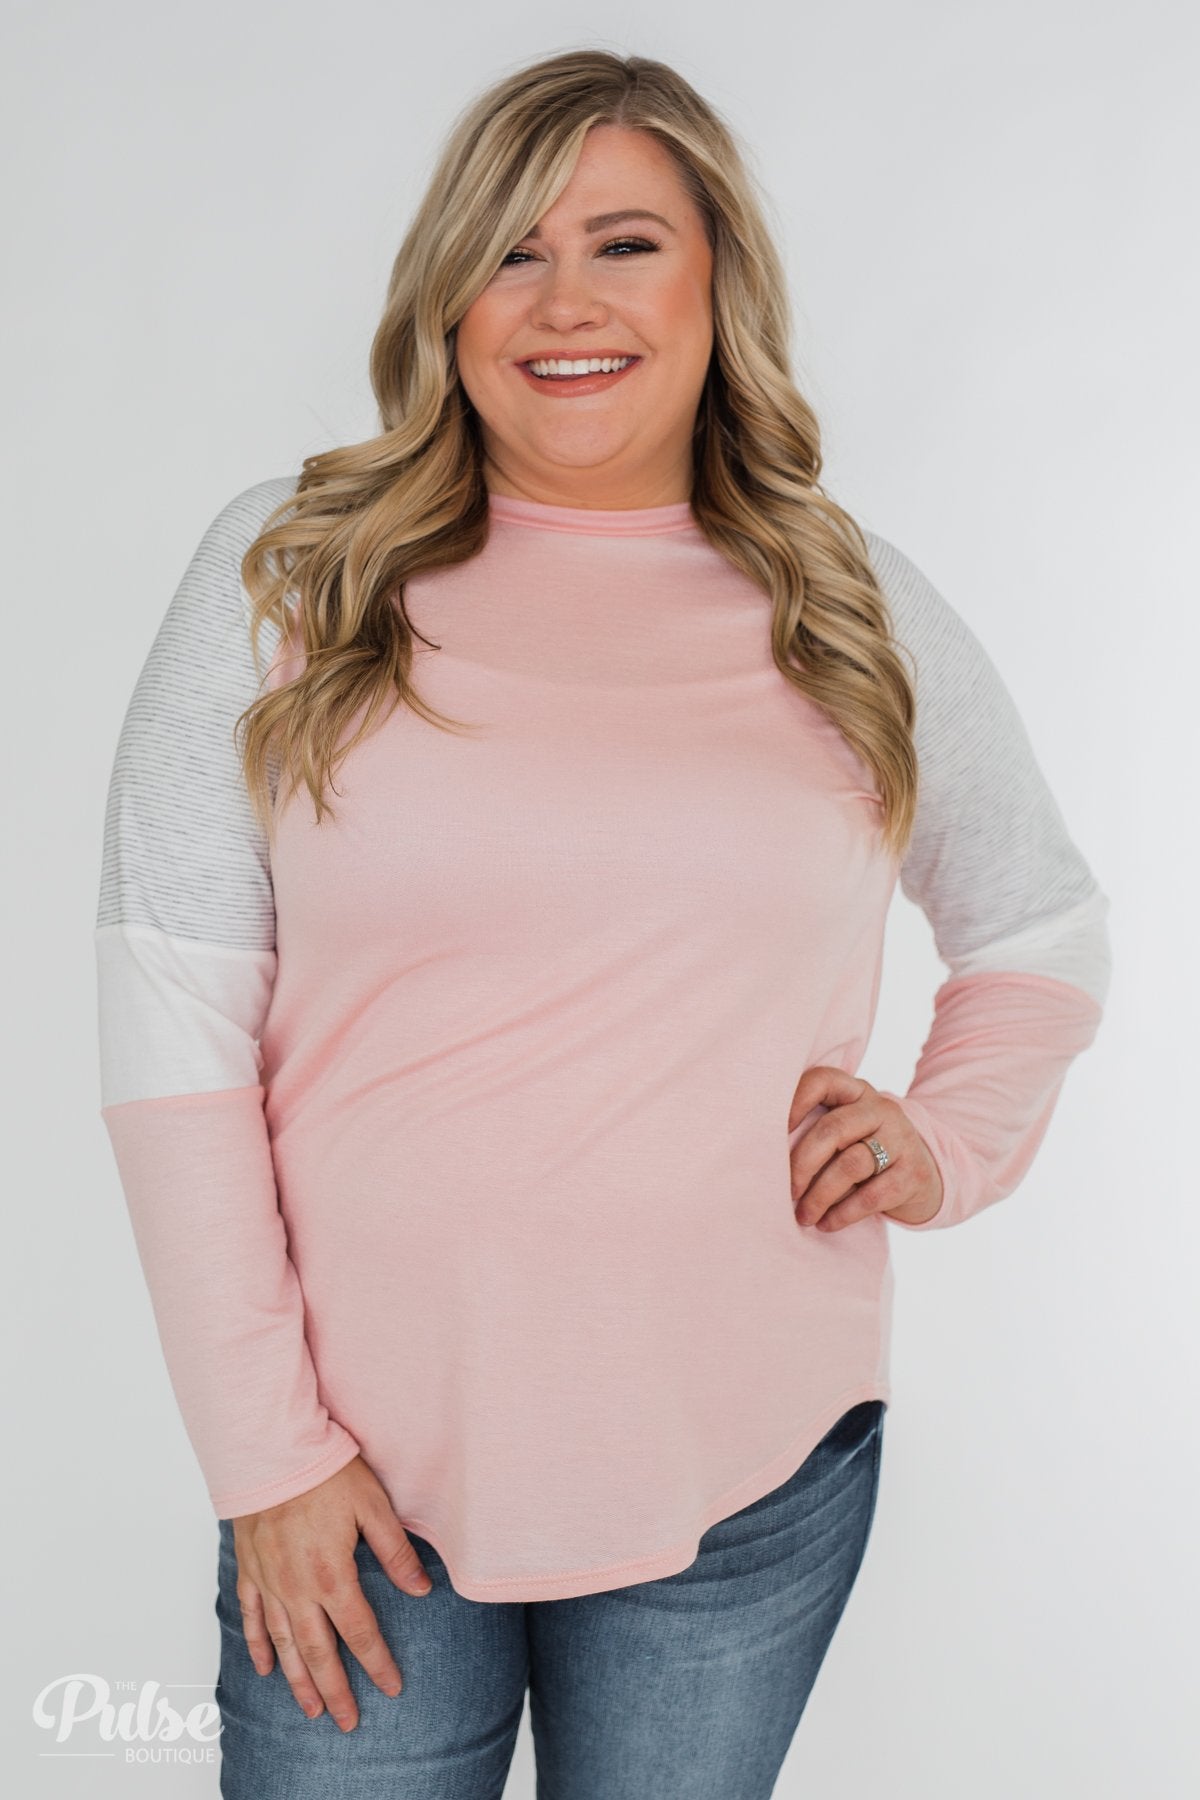 Leave it to Me Color Block Sleeve Top- Pink